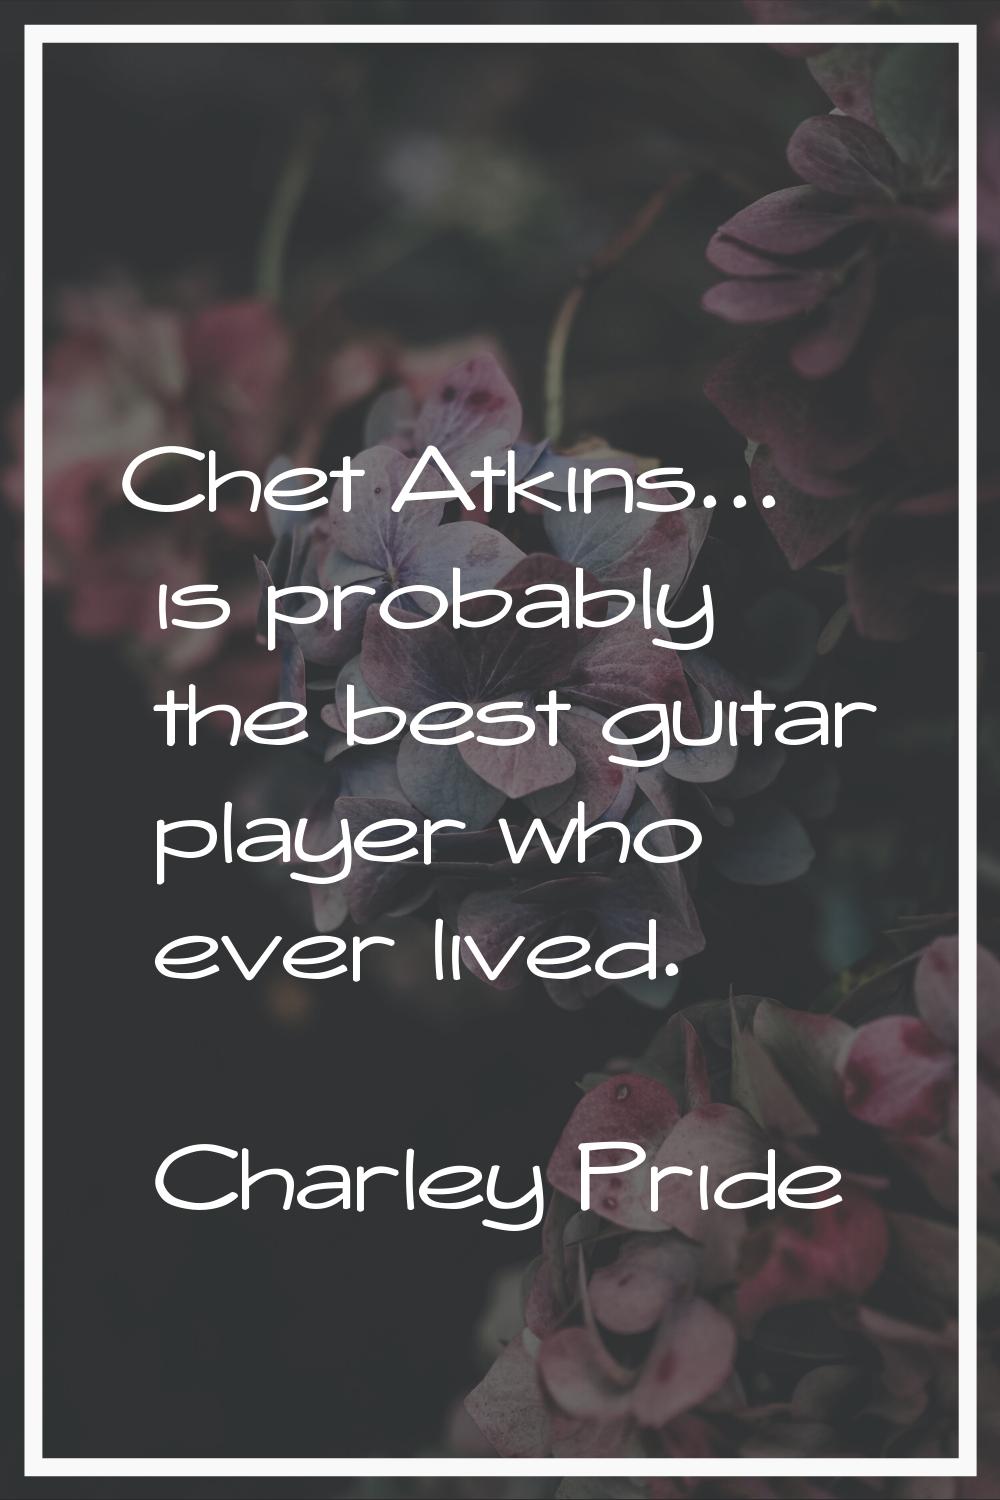 Chet Atkins... is probably the best guitar player who ever lived.